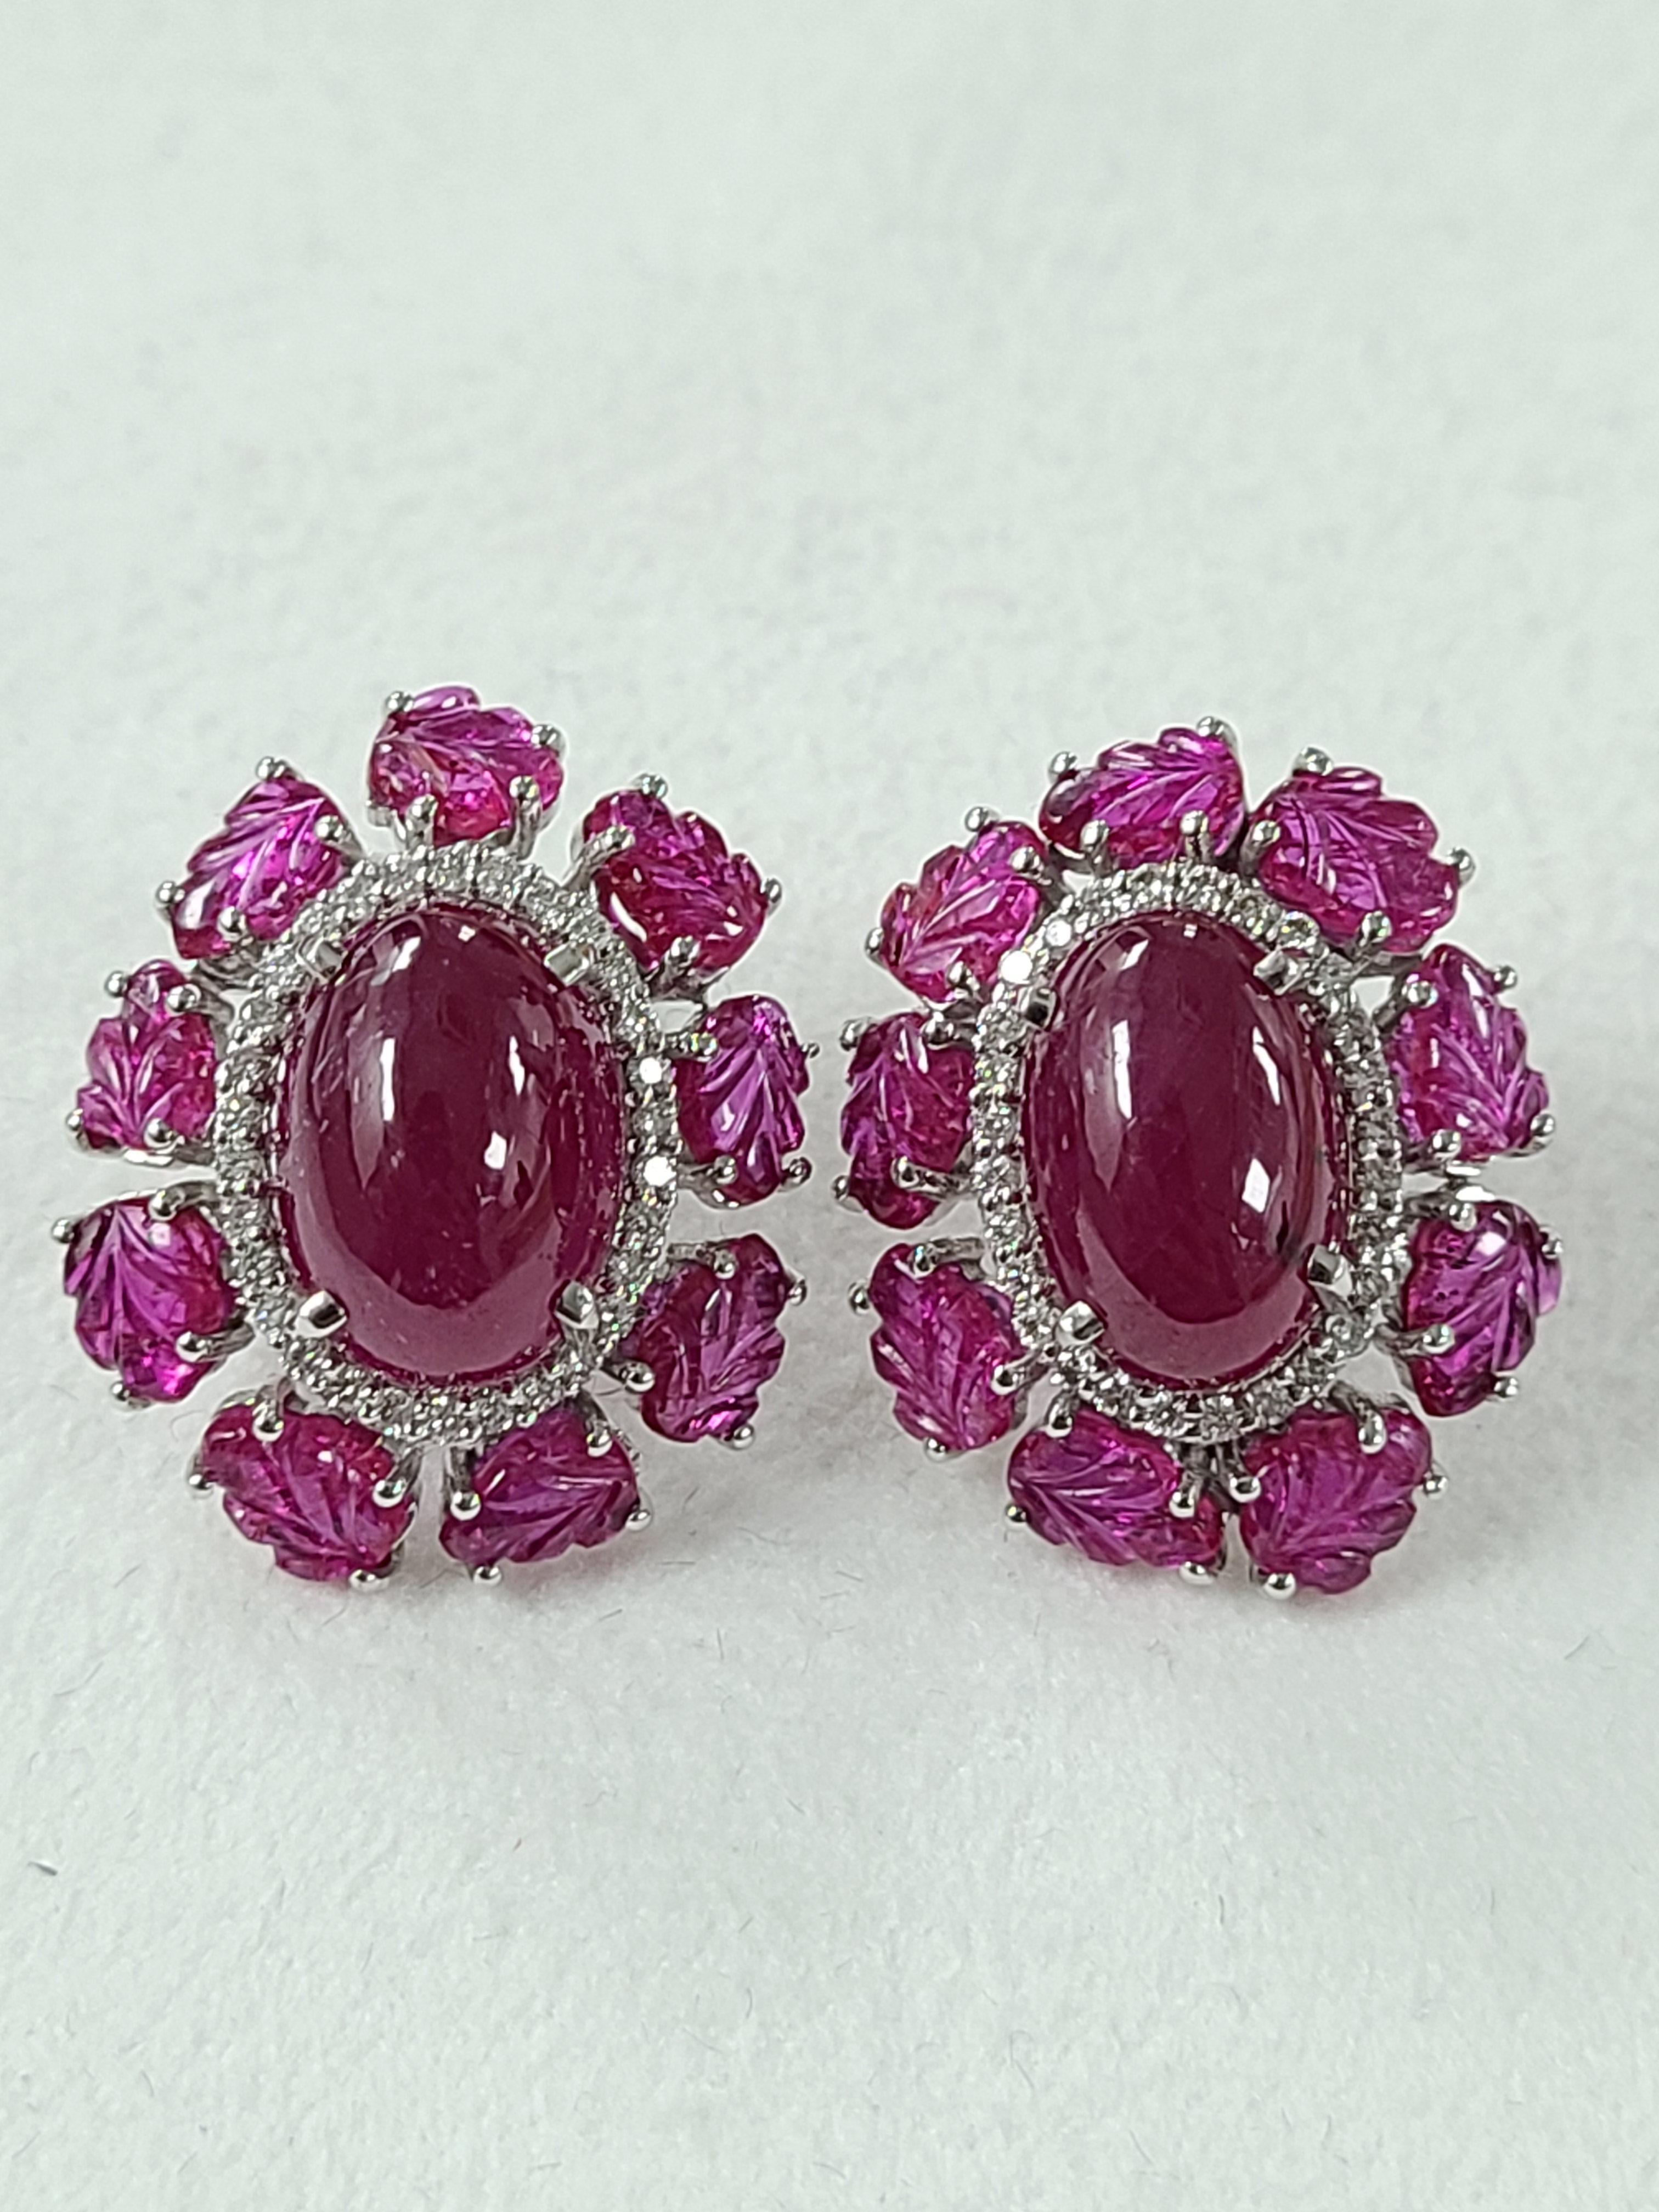 Anglo-Indian 18 Karat Gold Mozambique, Cabochon & Carved Ruby & Diamond Stud Earrings